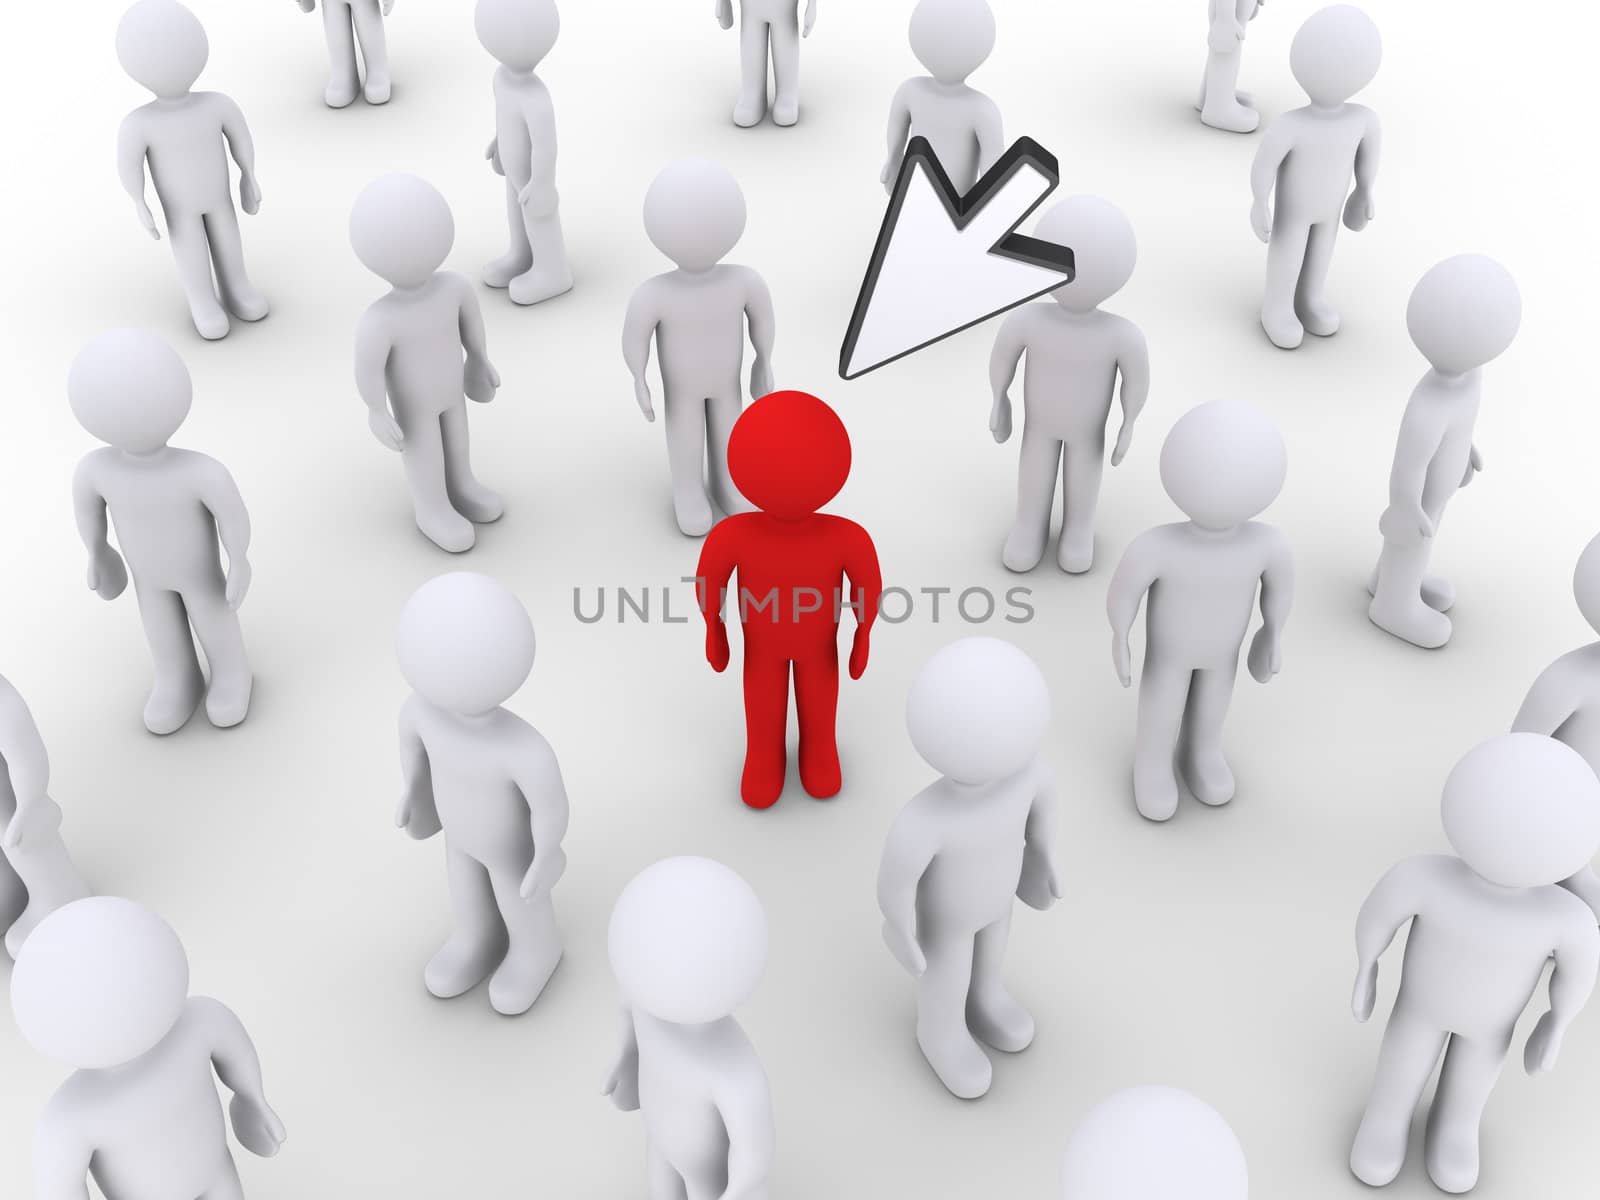 Person stands out by a mouse pointer by 6kor3dos